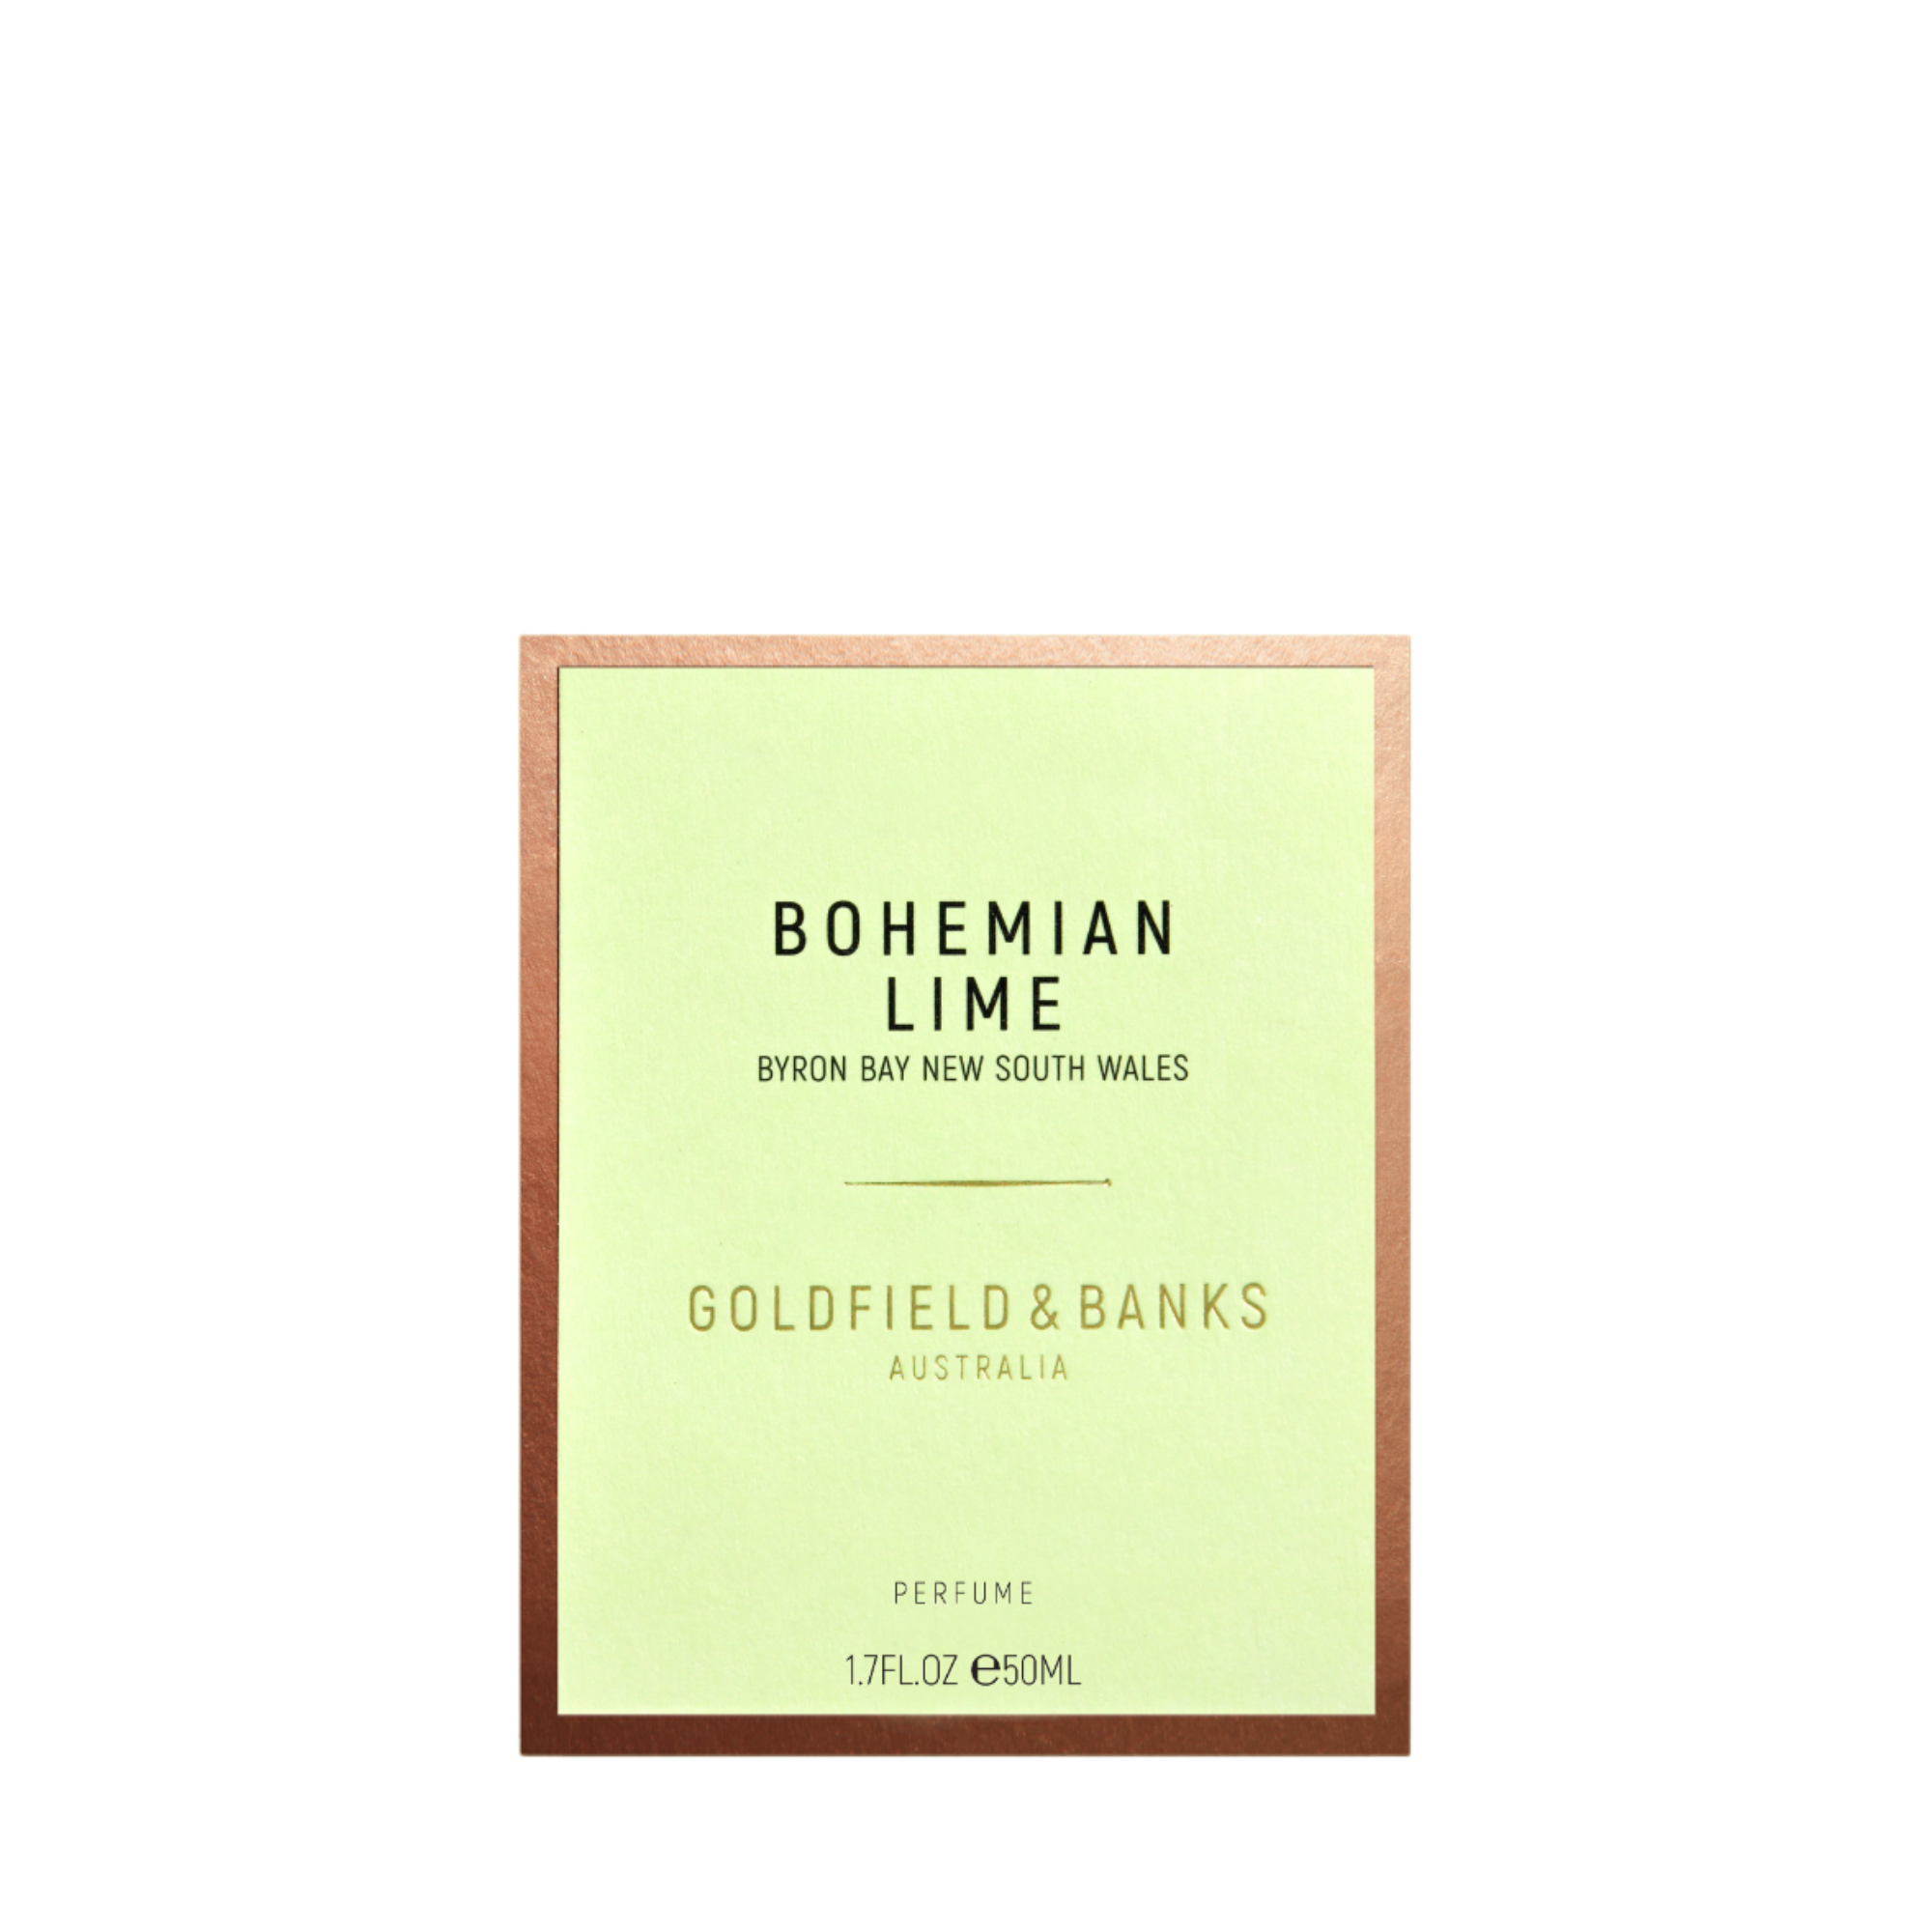 Bohemian Lime Perfume Concentrate